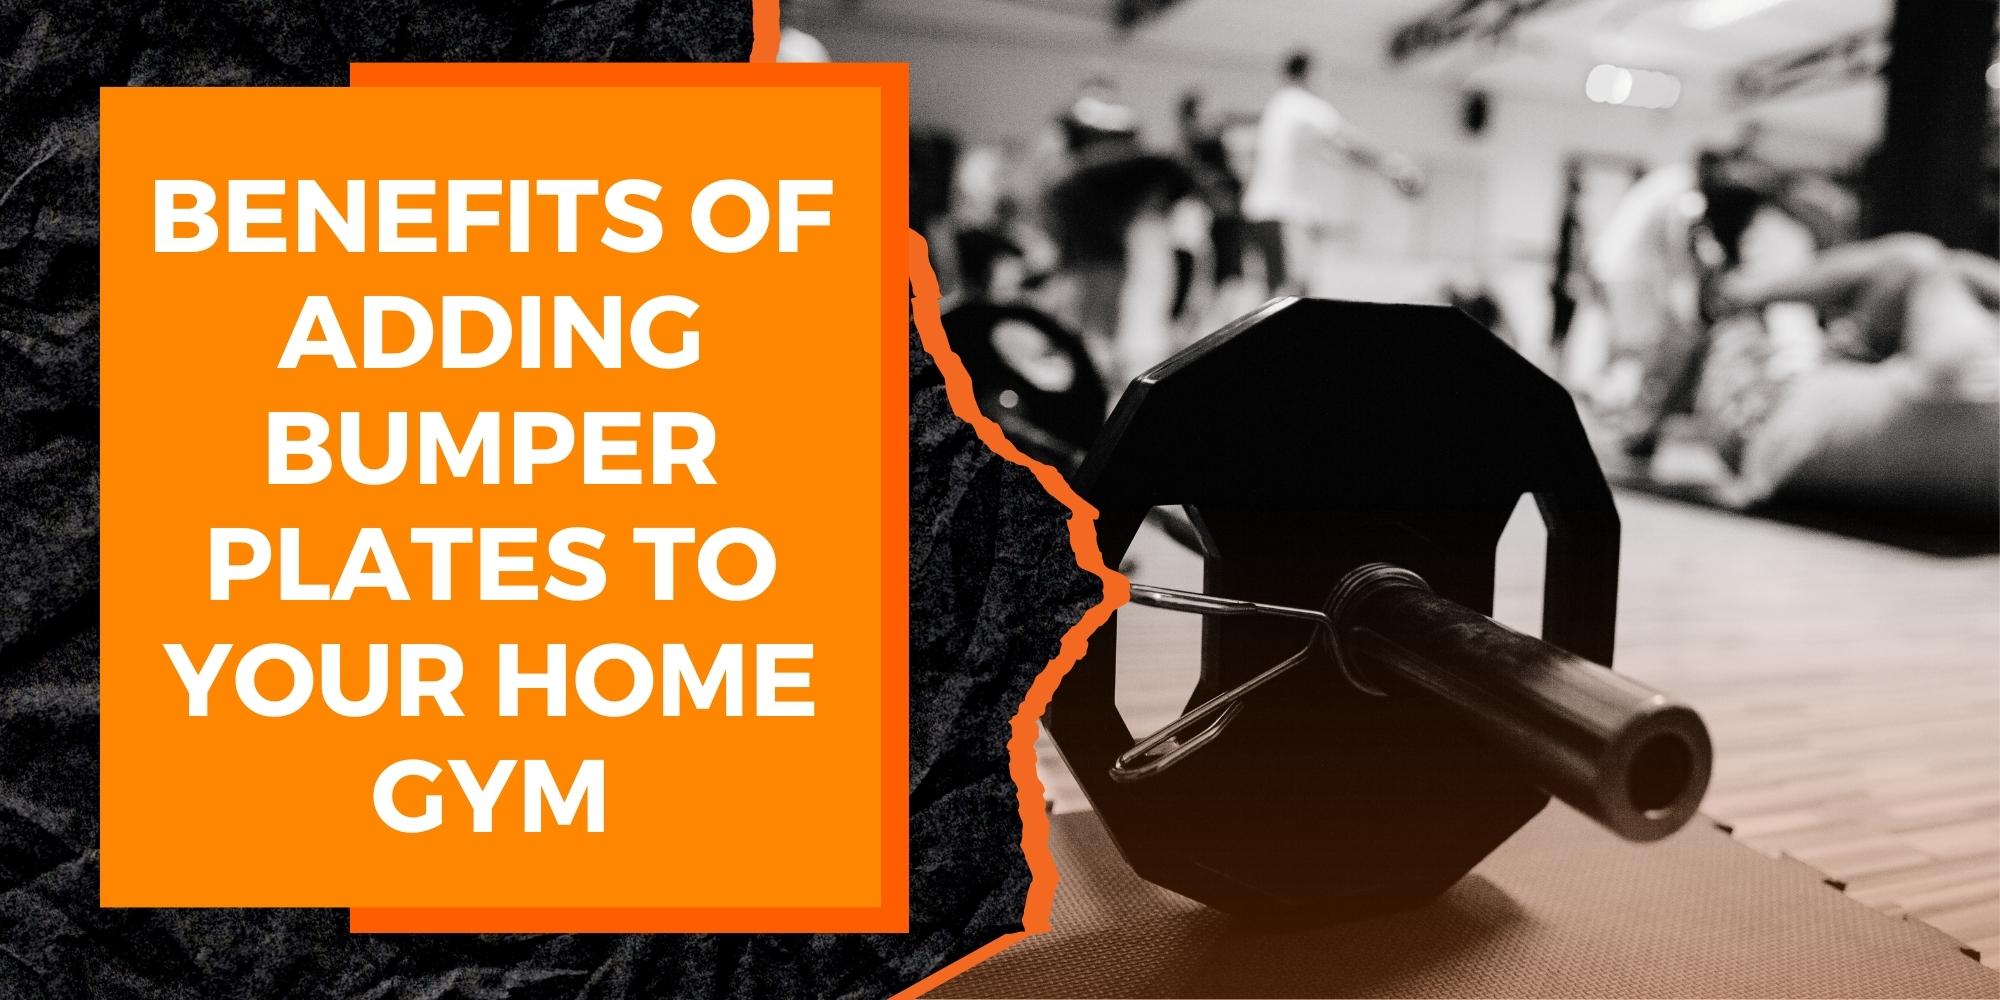 The Benefits of Adding Bumper Plates to Your Home Gym